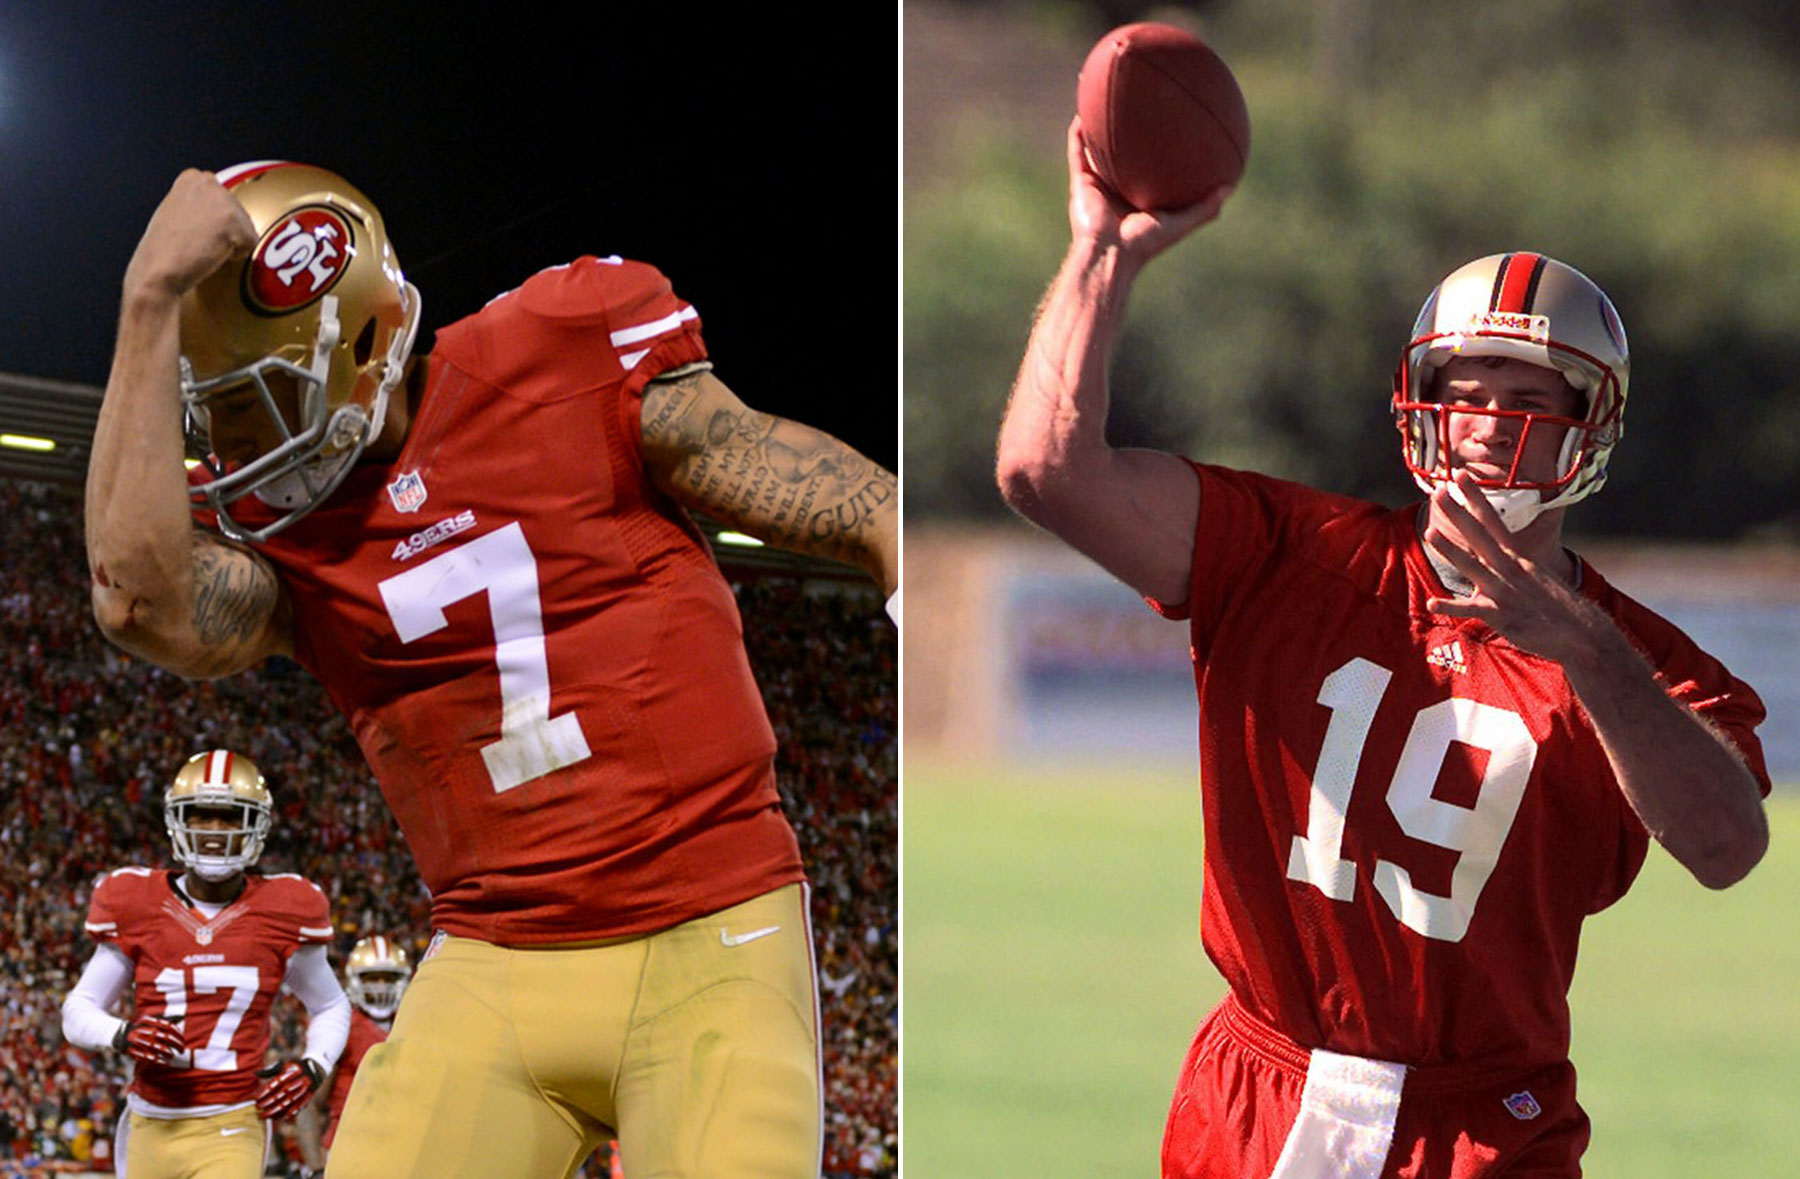 49ers’ best and worst draft picks since 2000 From Kaepernick to Carmazzi